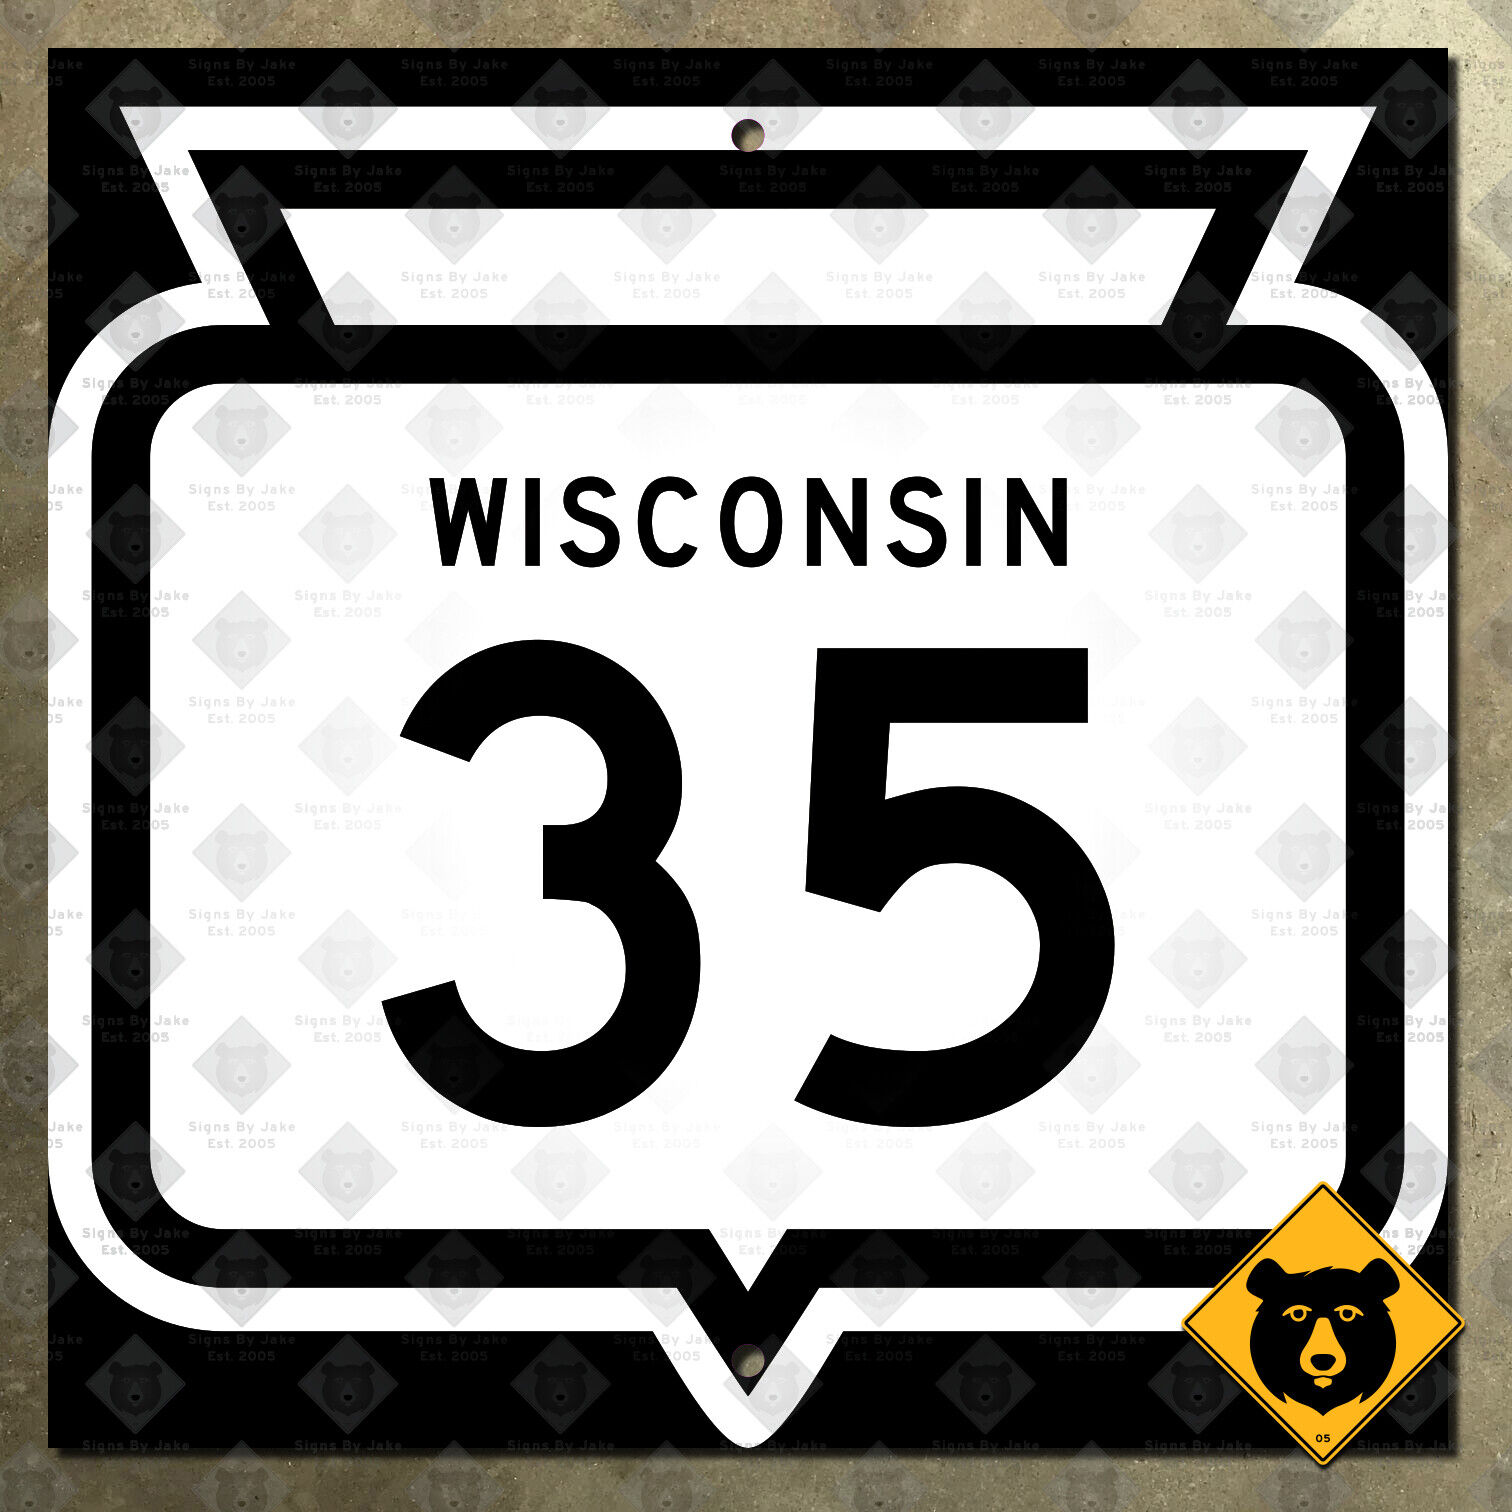 Wisconsin state highway 35 Great River Road Hudson route marker sign 16x16